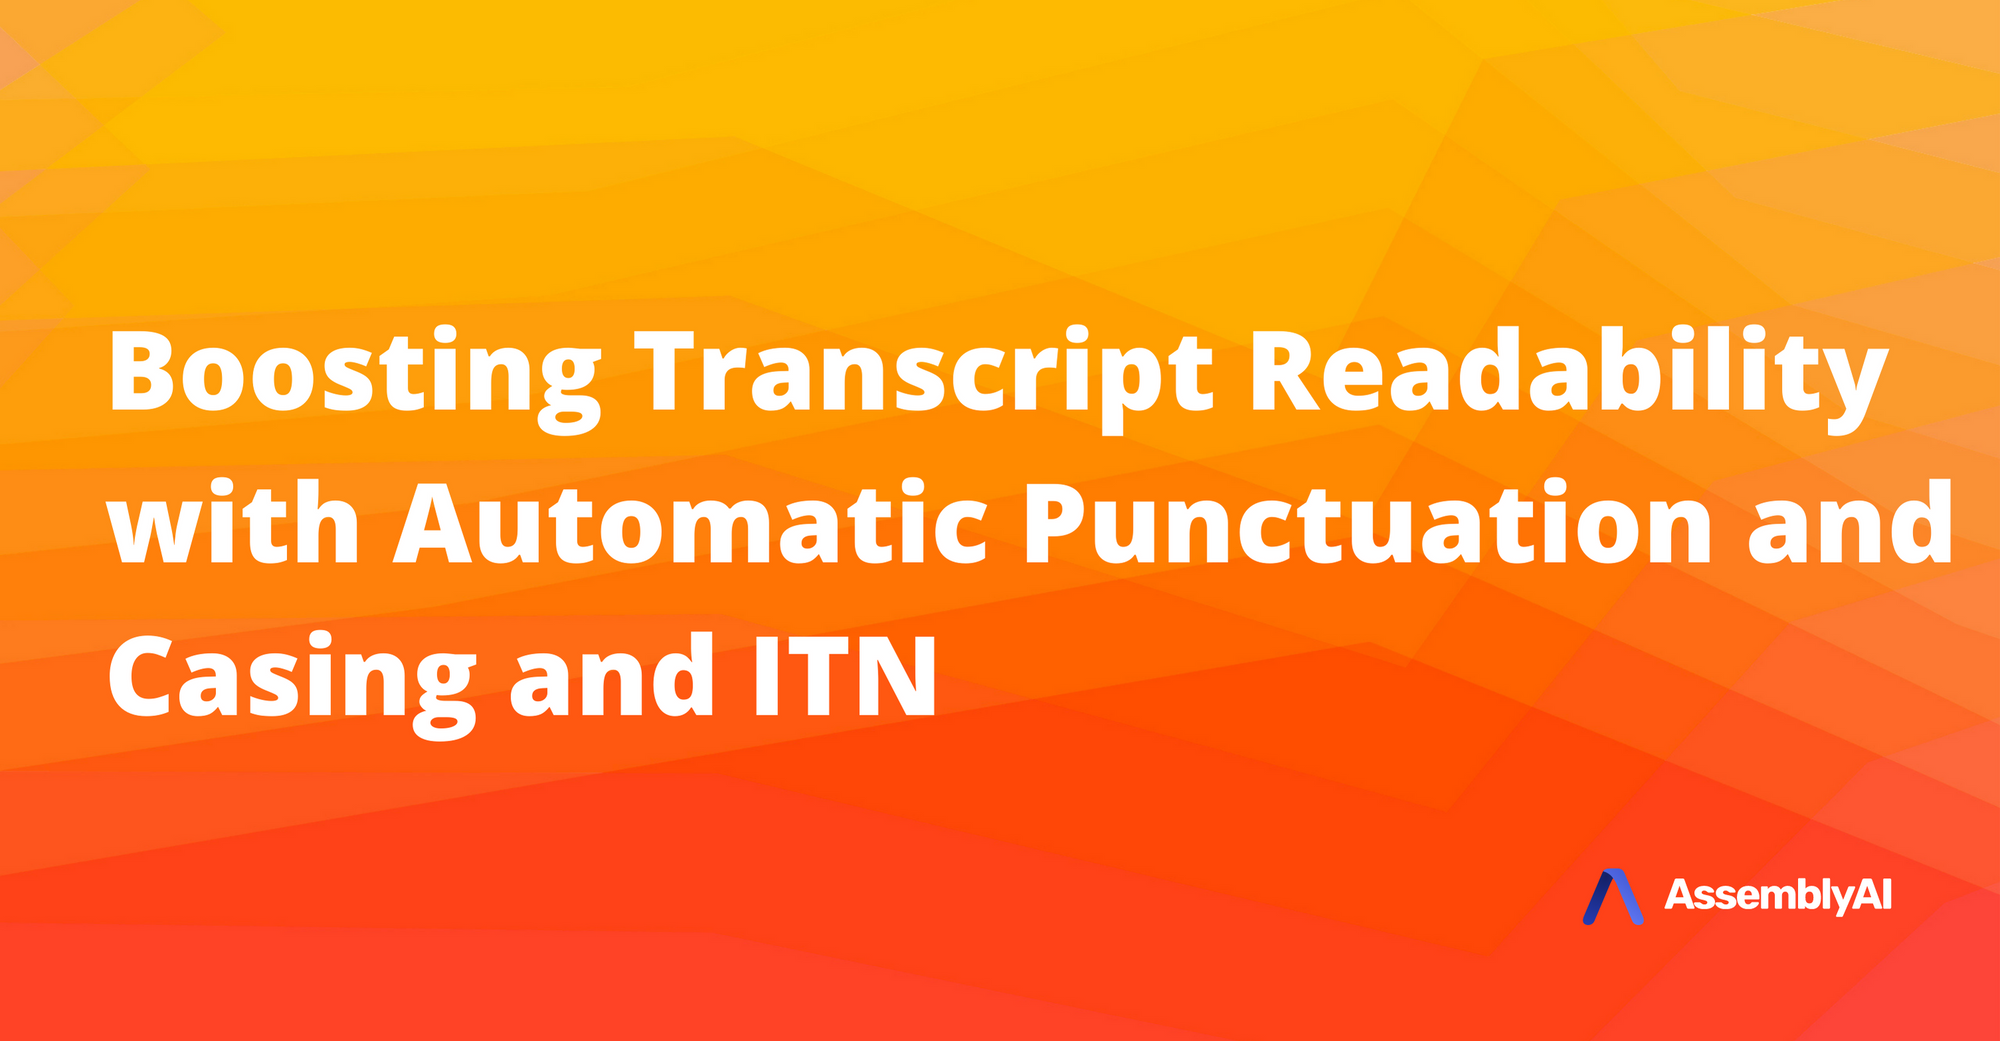 Boosting Transcript Readability with Automatic Punctuation and Casing and ITN